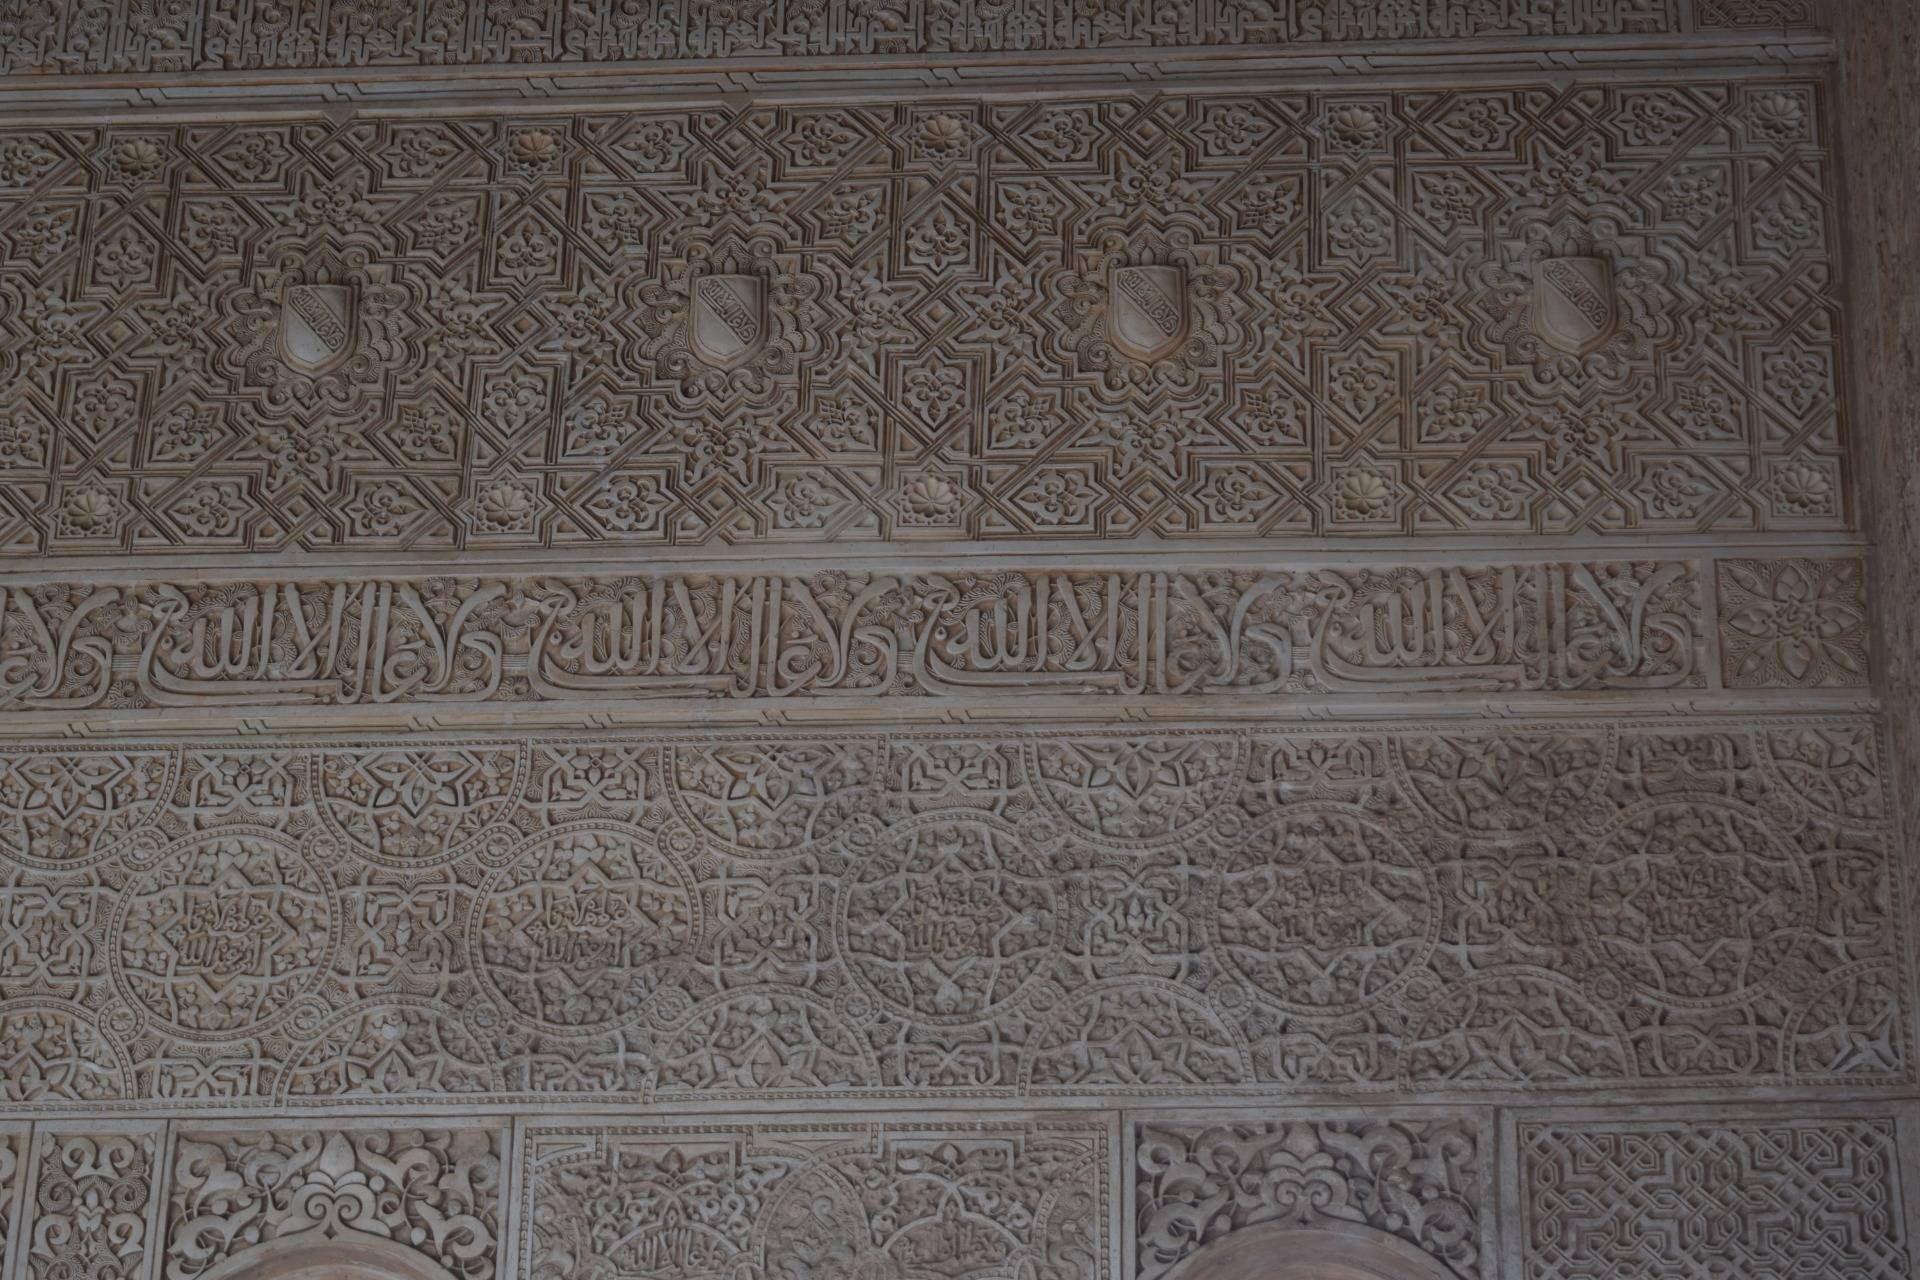 Arab text in Alhambra